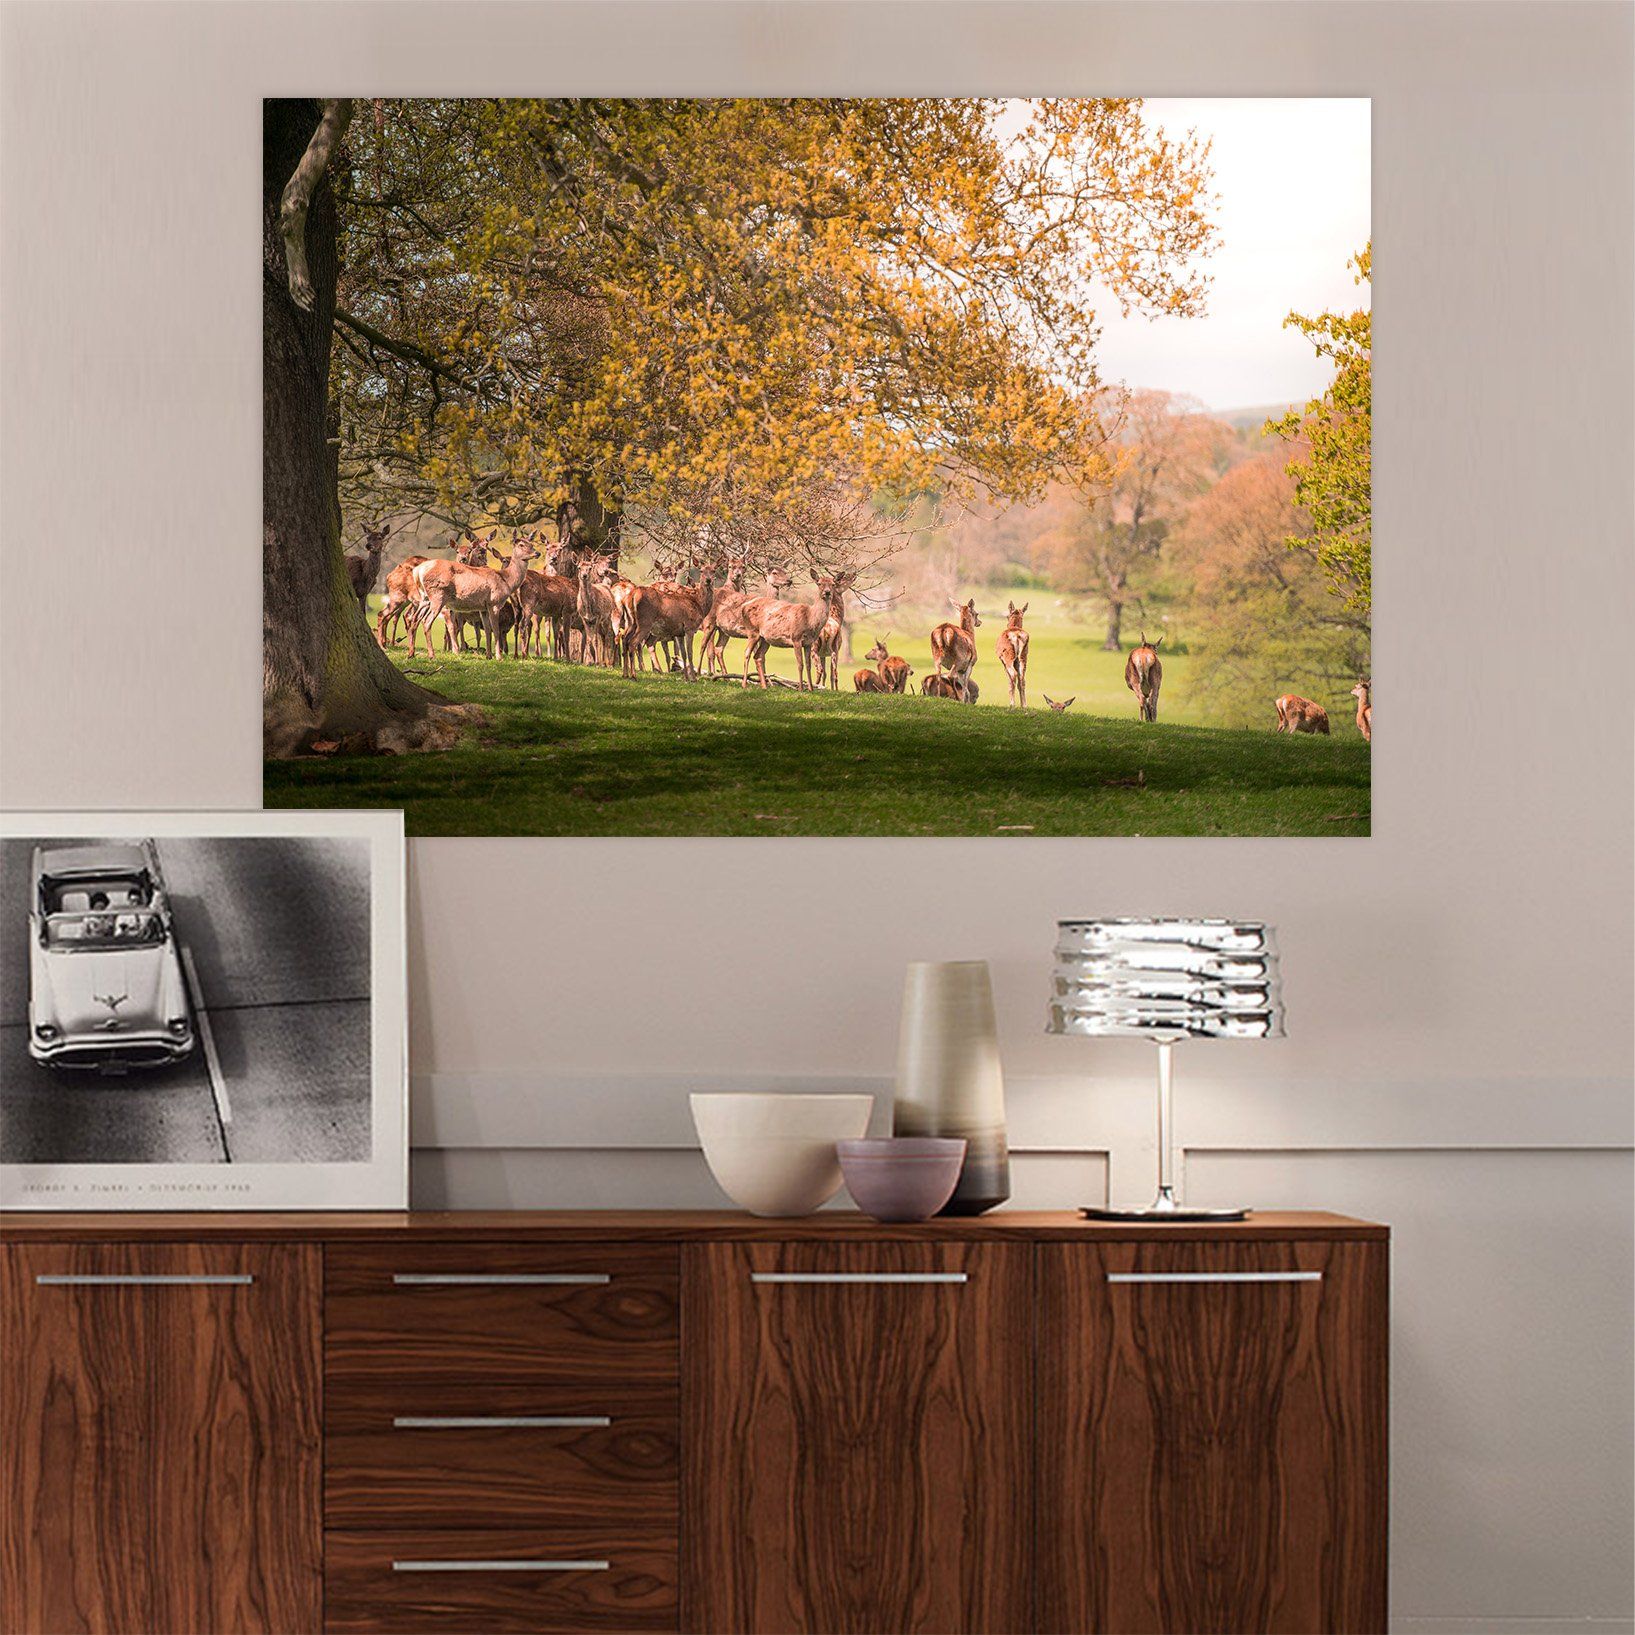 3D Wild Raindeer In Coutry Park In Autumn 130 Animal Wall Stickers Wallpaper AJ Wallpaper 2 